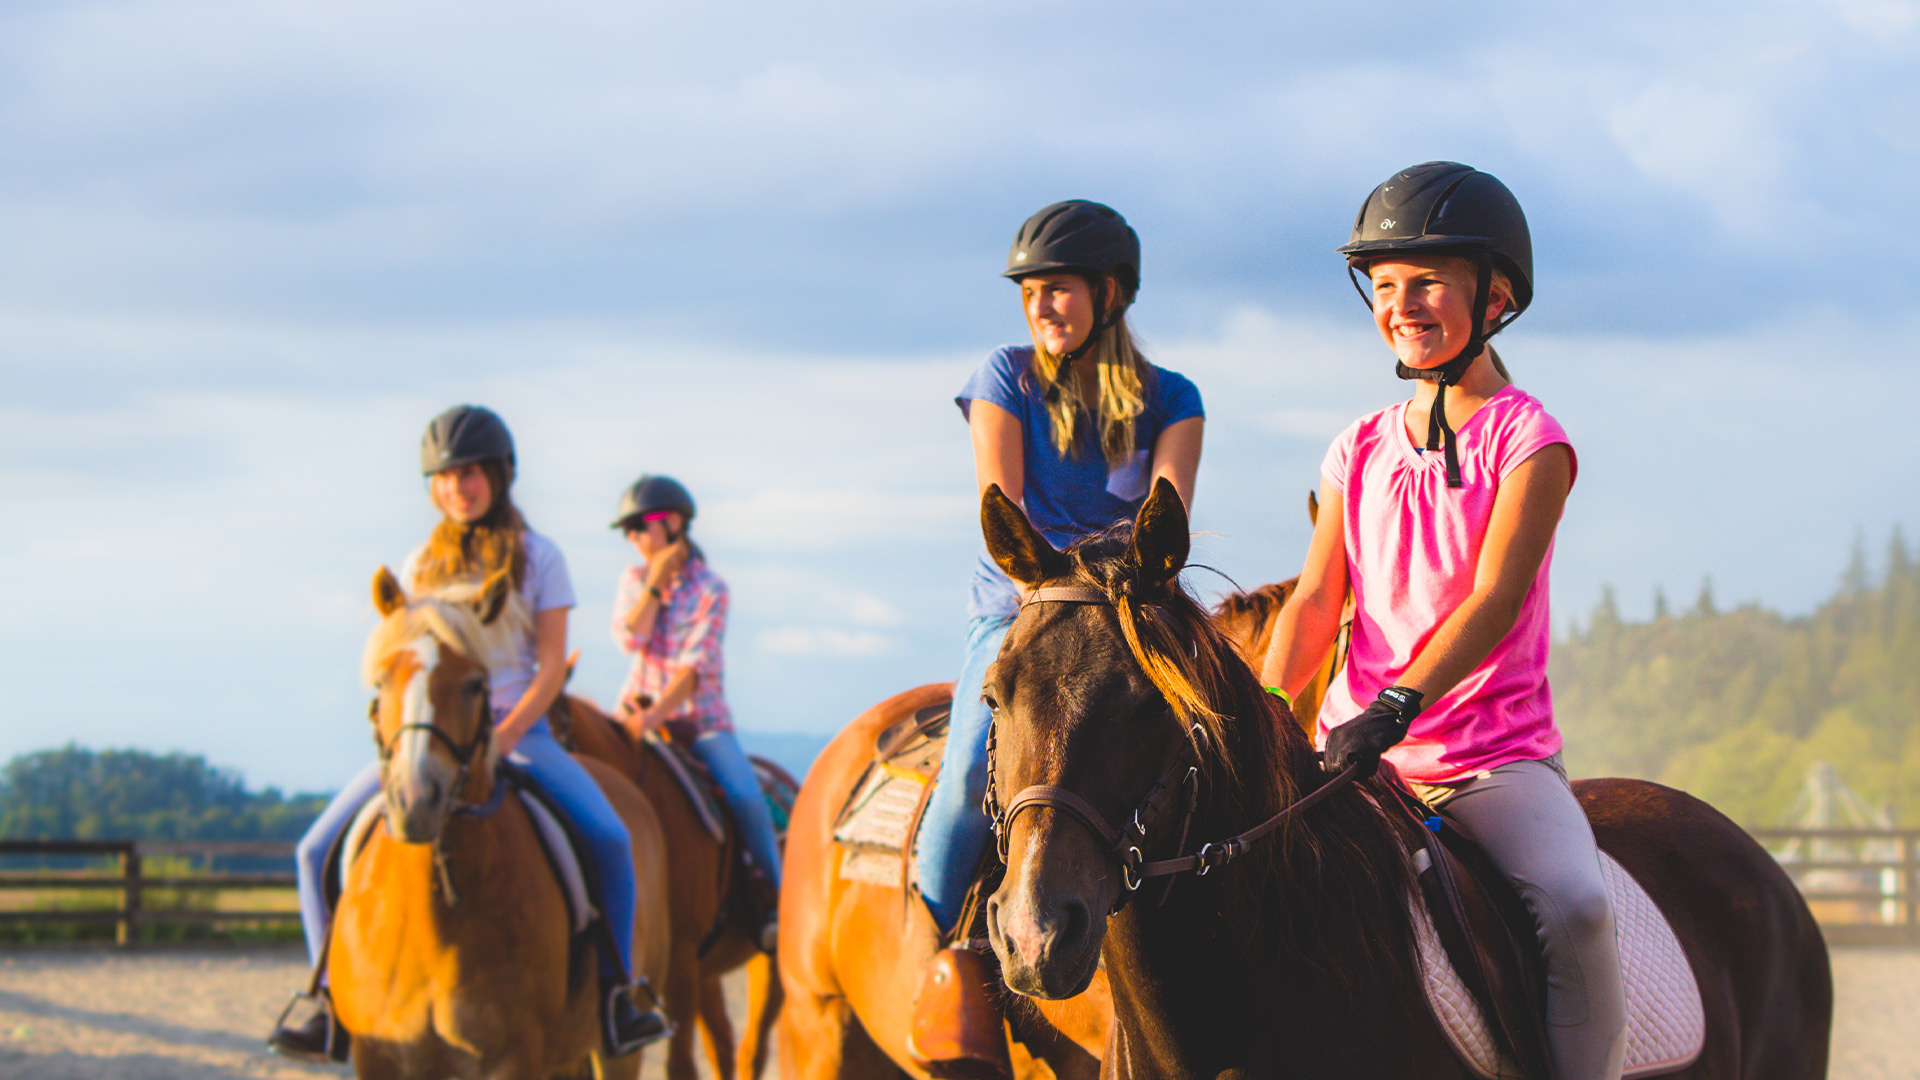 Horse Day Camp at Warm Beach Camp and Conference Center, Stanwood, WA; near Seattle.